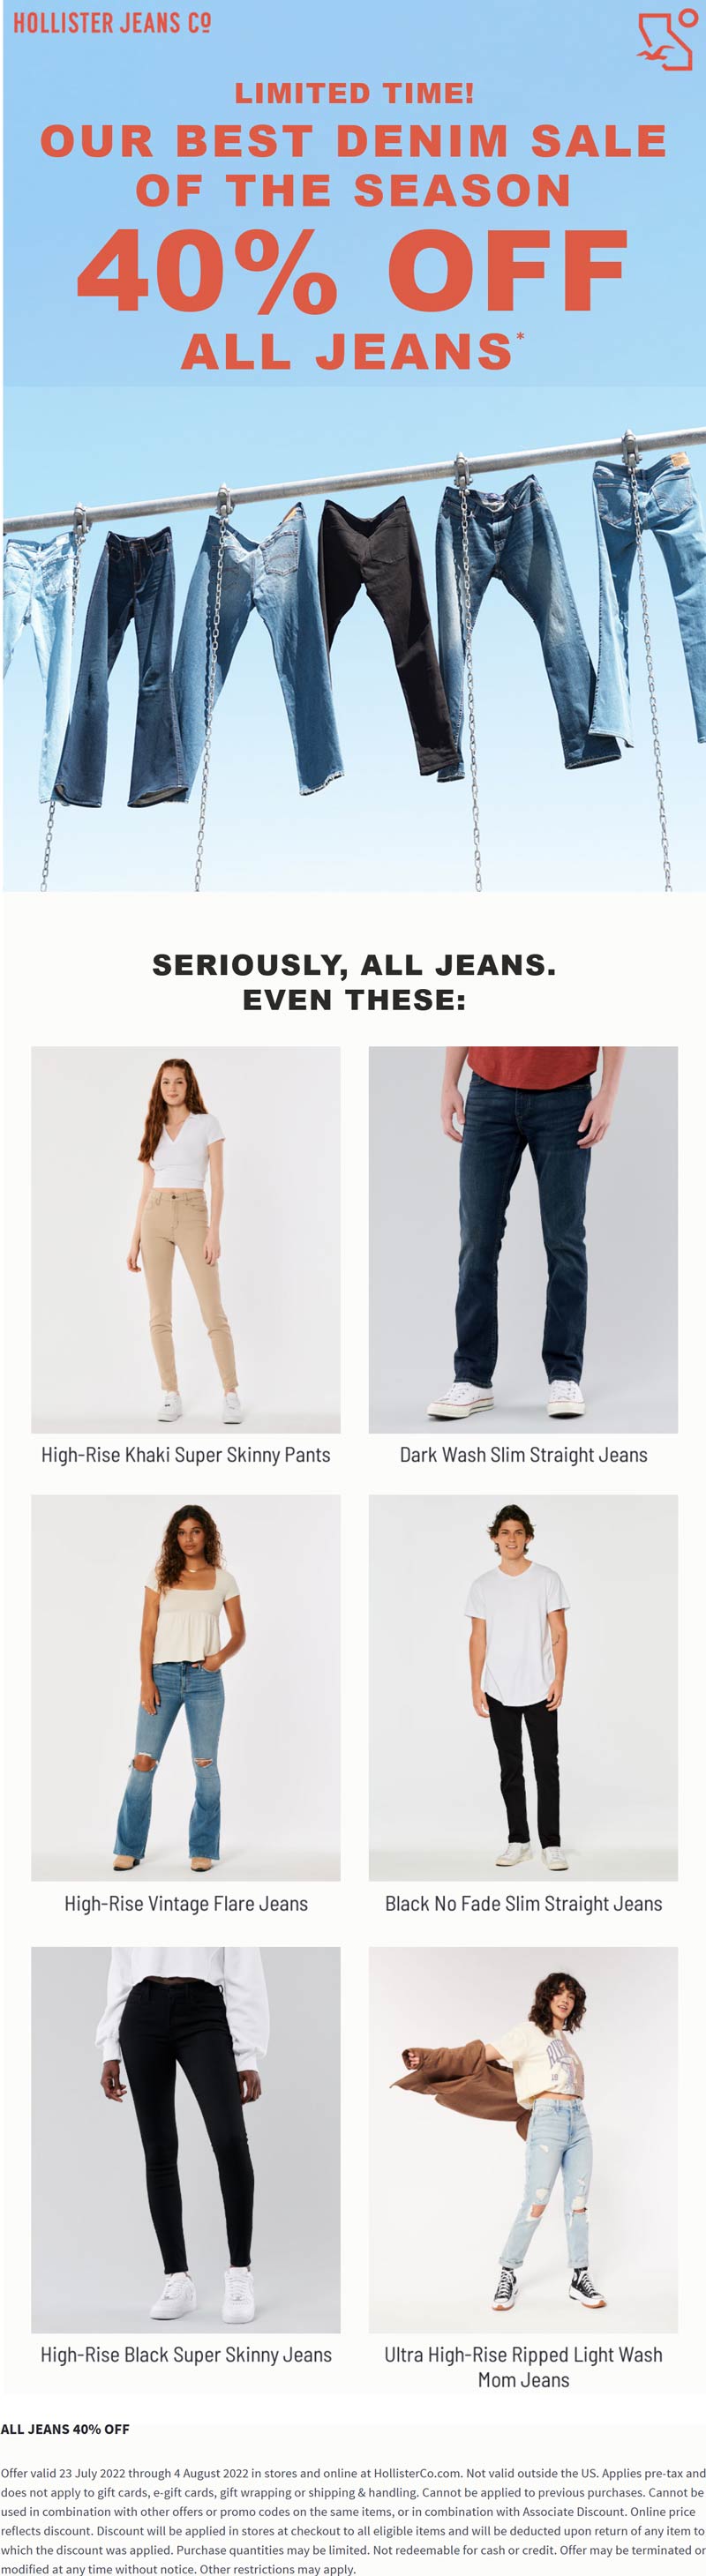 Hollister stores Coupon  40% off all jeans at Hollister, ditto online #hollister 